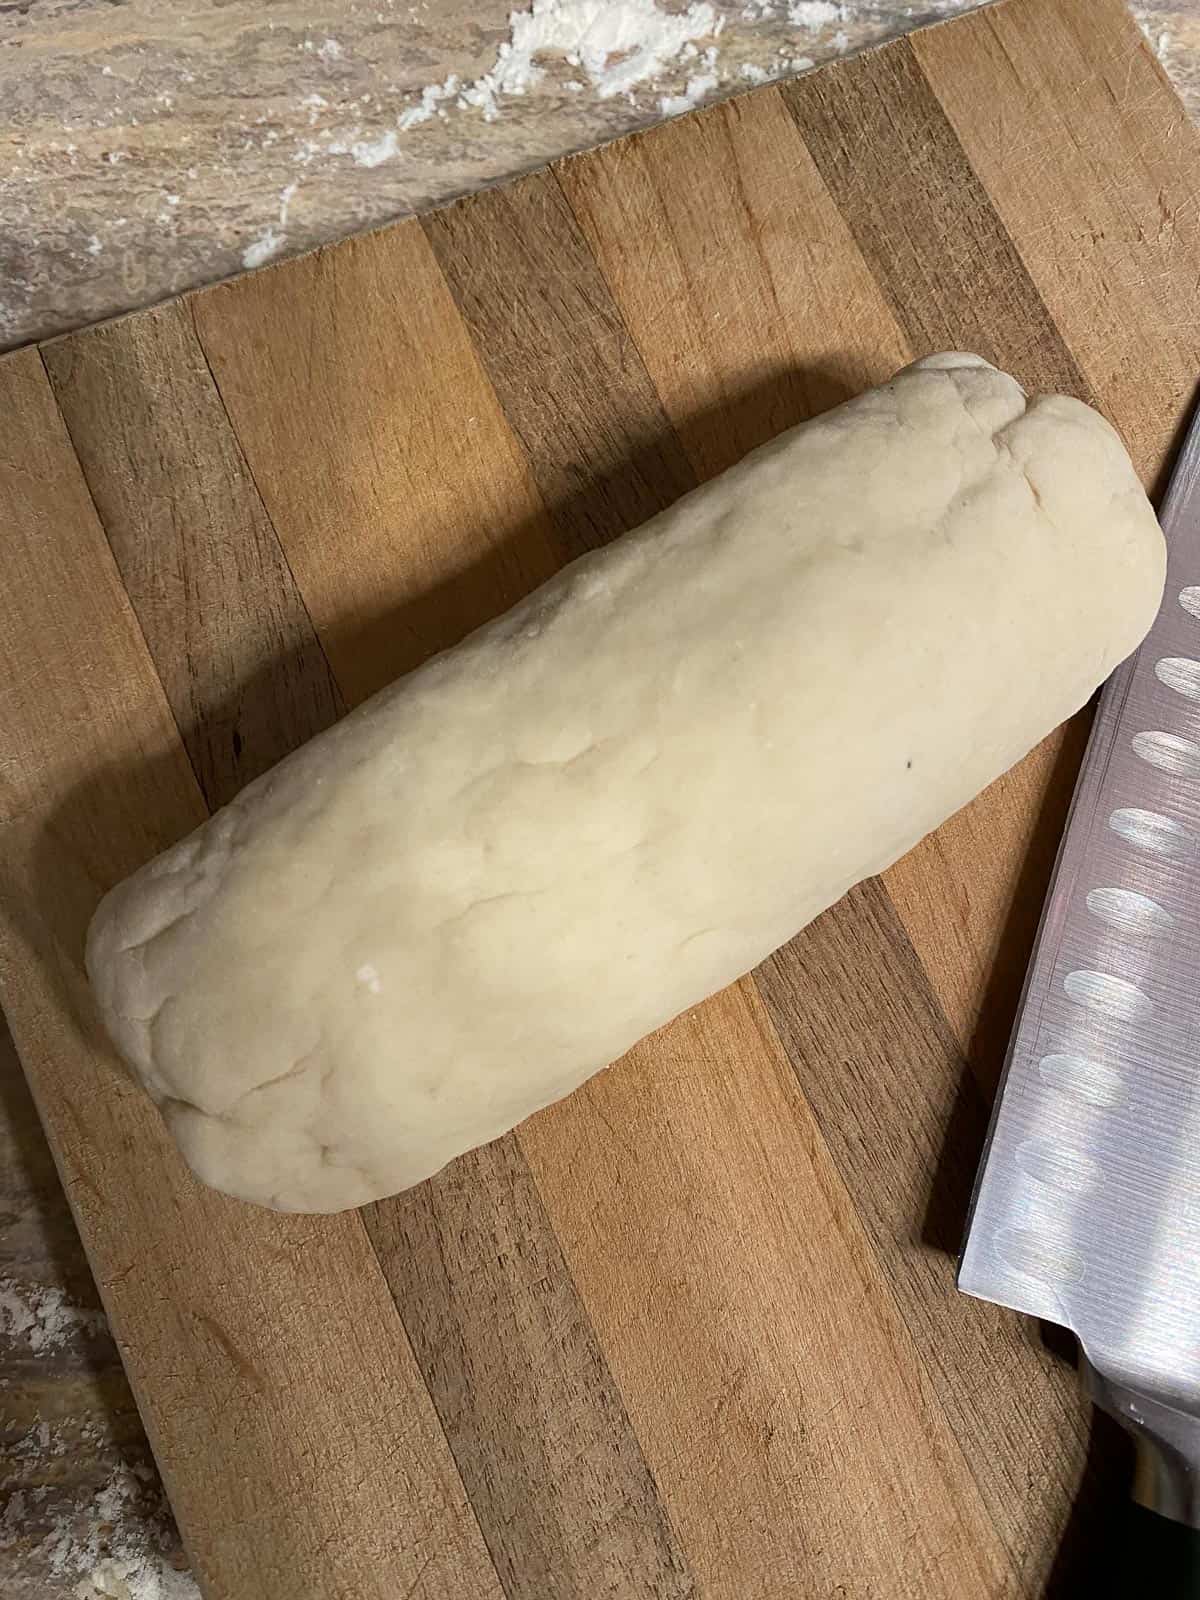 process shot of formed dough on cutting board